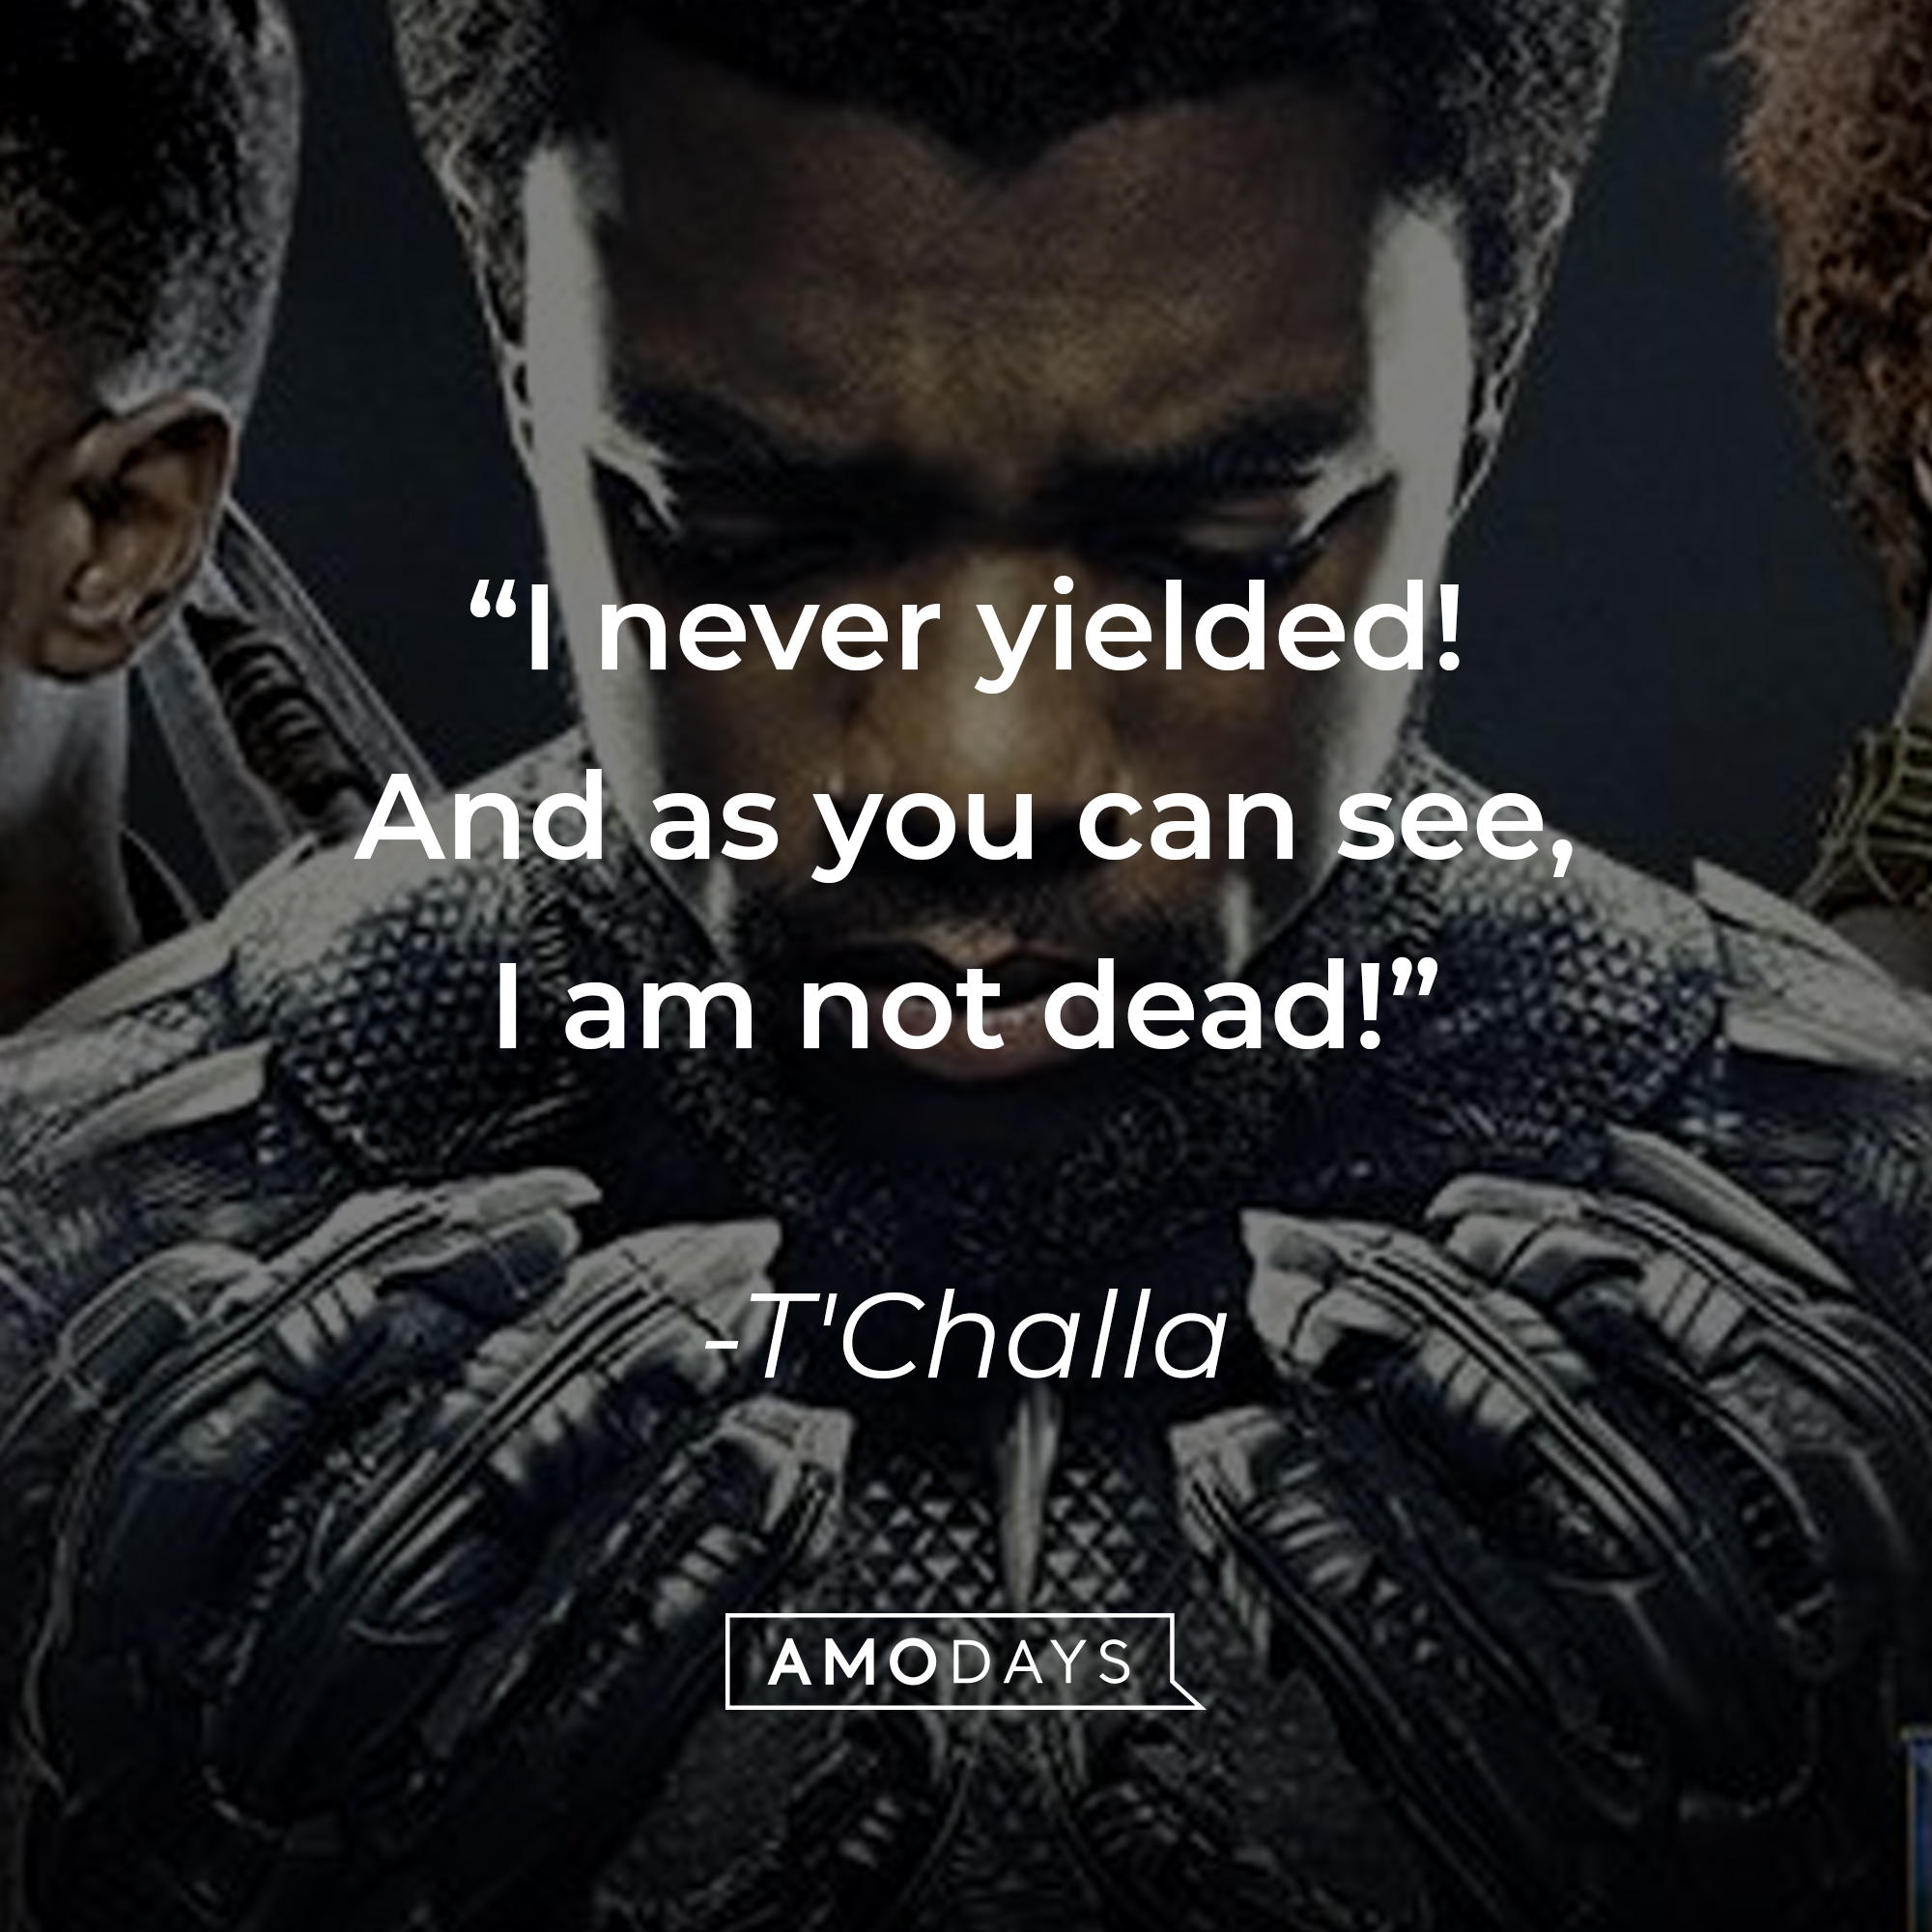 T'Challa's quote: “I never yielded! And as you can see, I am not dead!” | Source: facebook.com/BlackPantherMovie